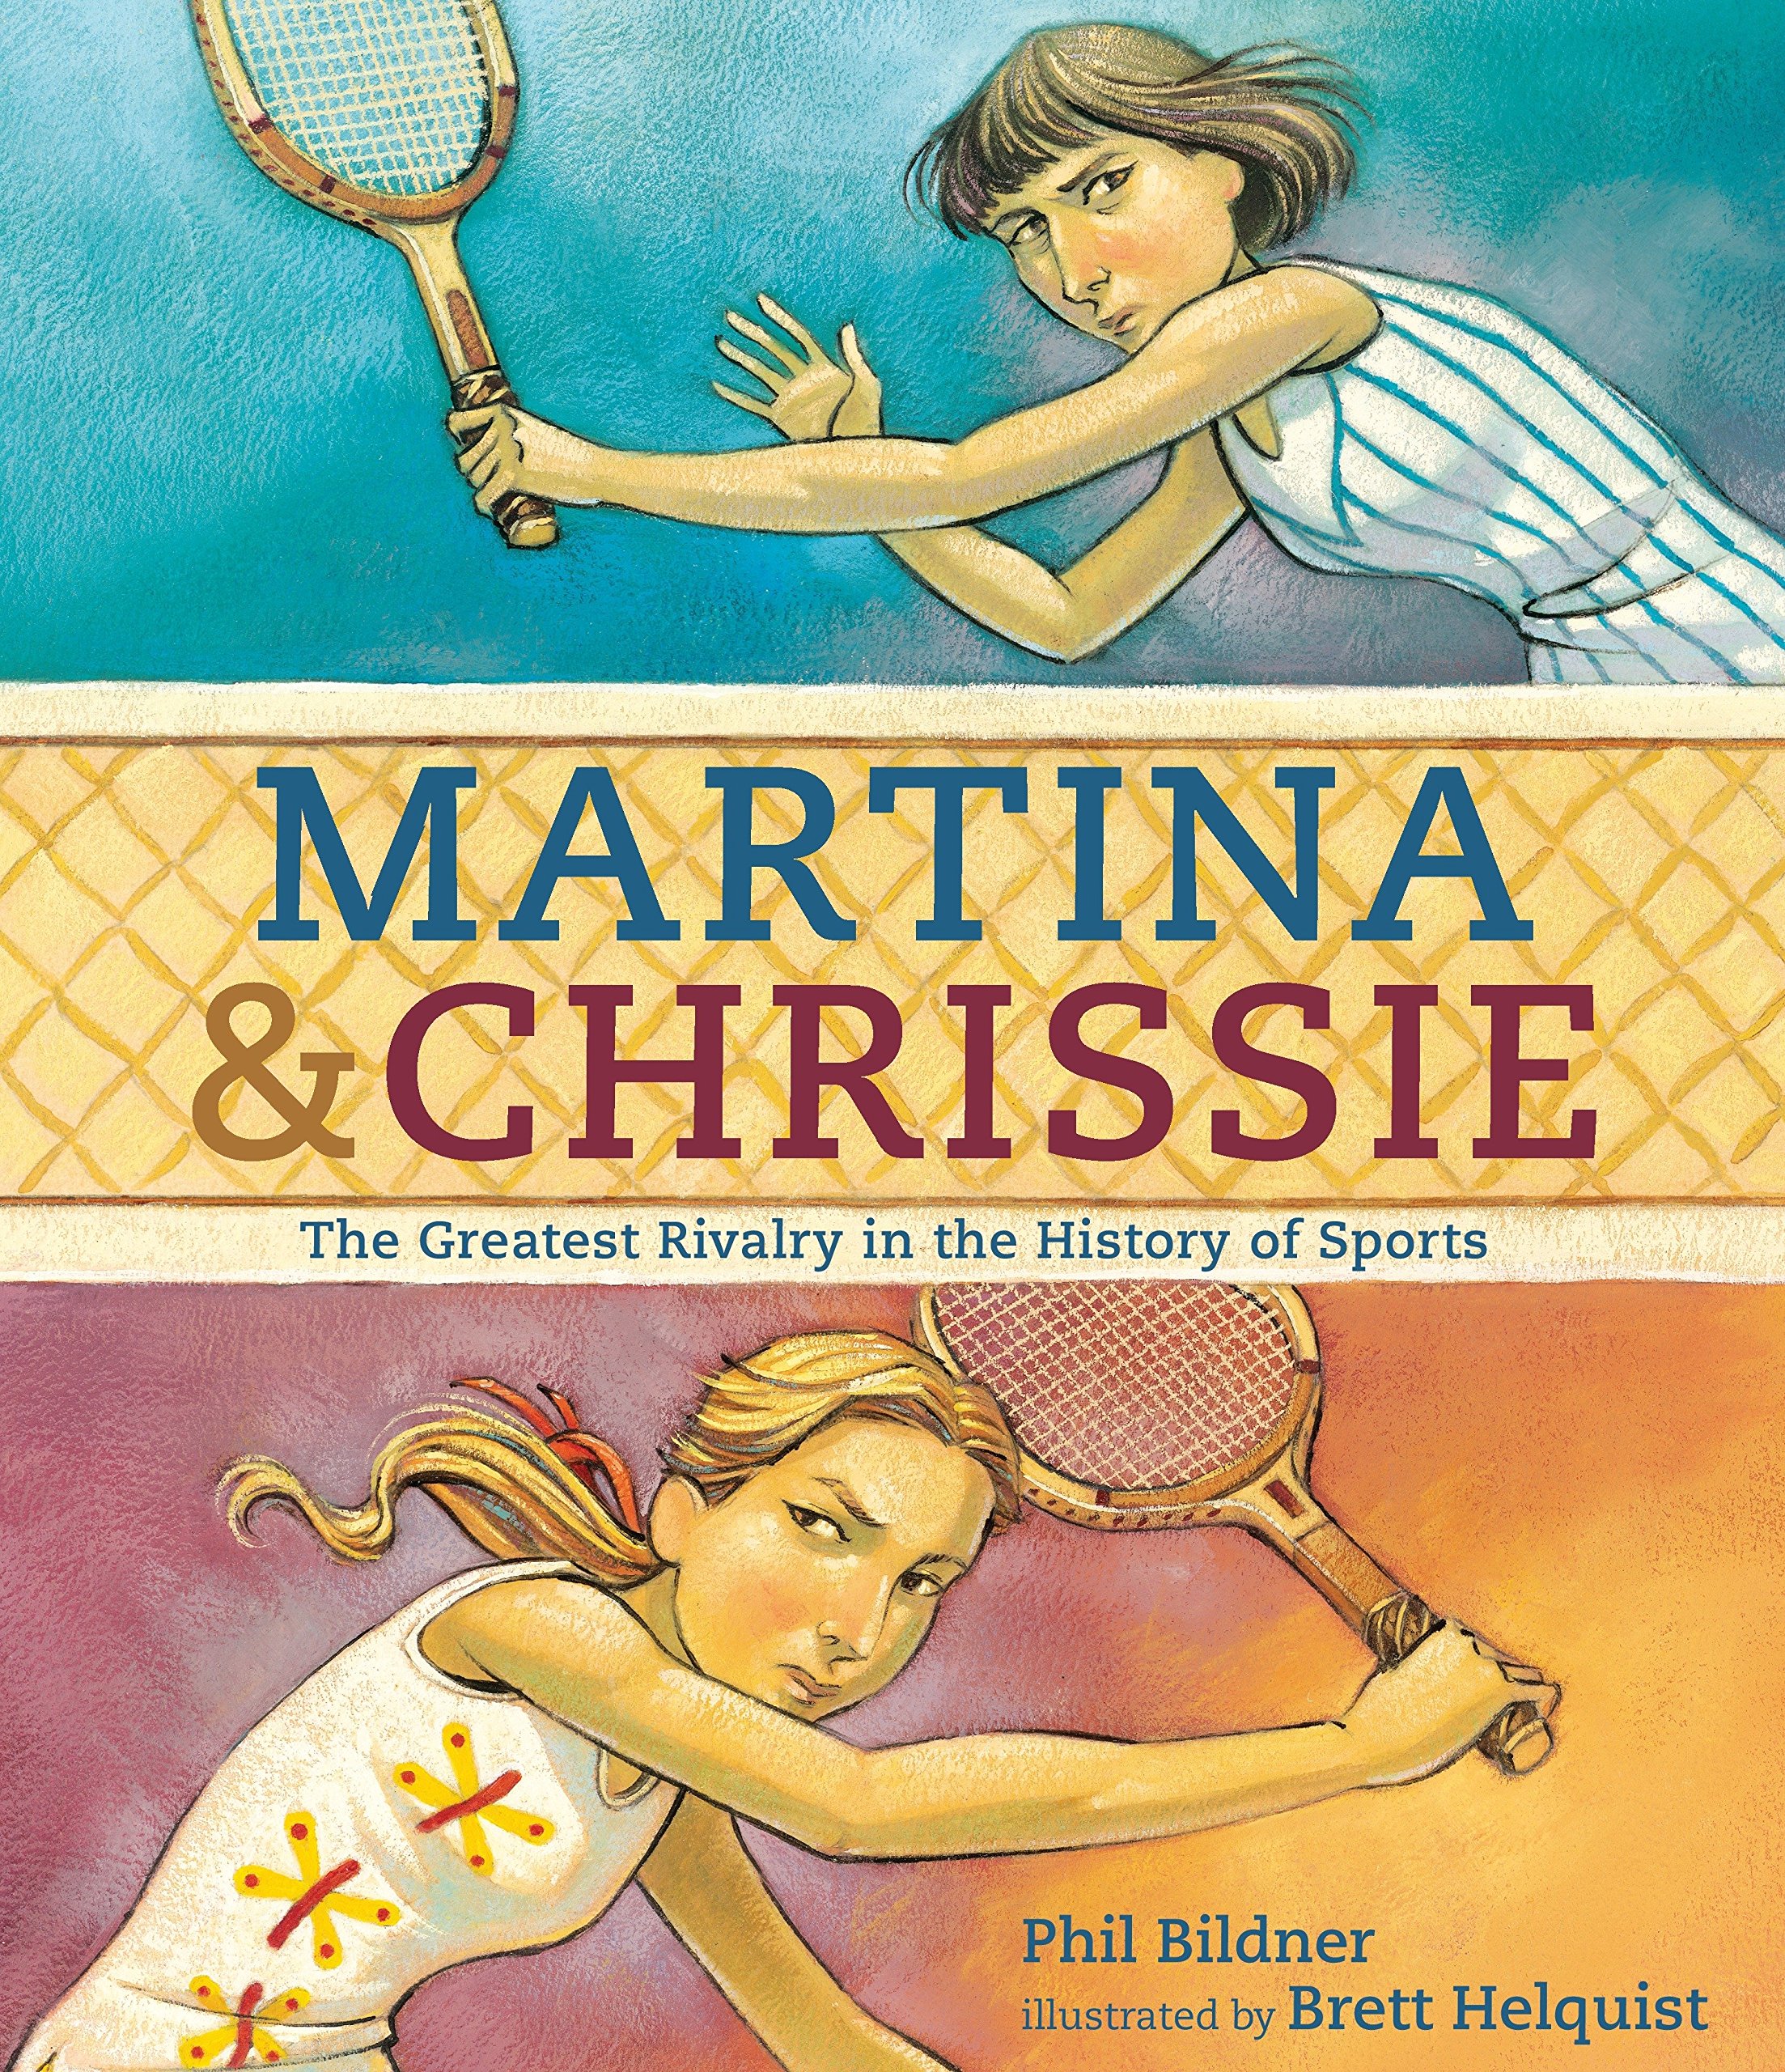 Martina %26 Chrissie: The Greatest Rivalry in the History of Sports